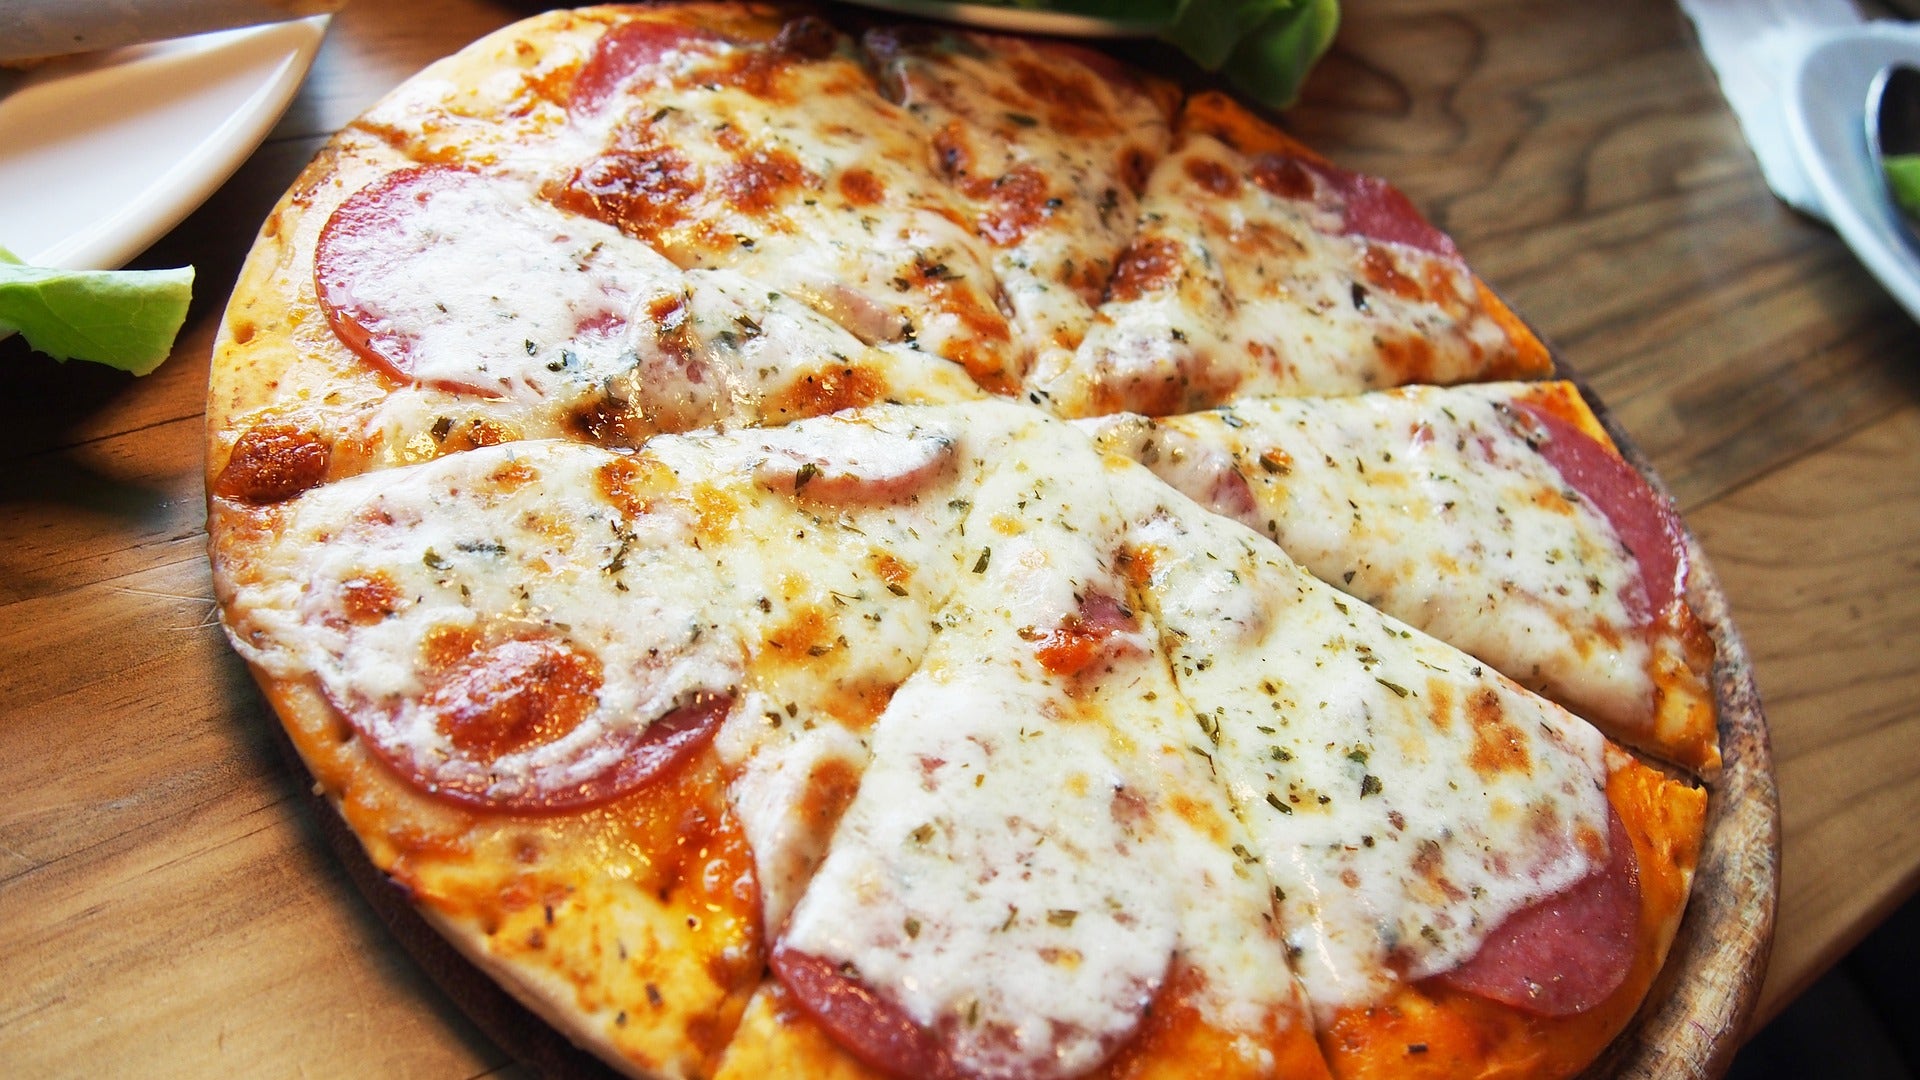 Is The Pizza Industry 'Broken'? Why Investors Should Watch This Key Metric